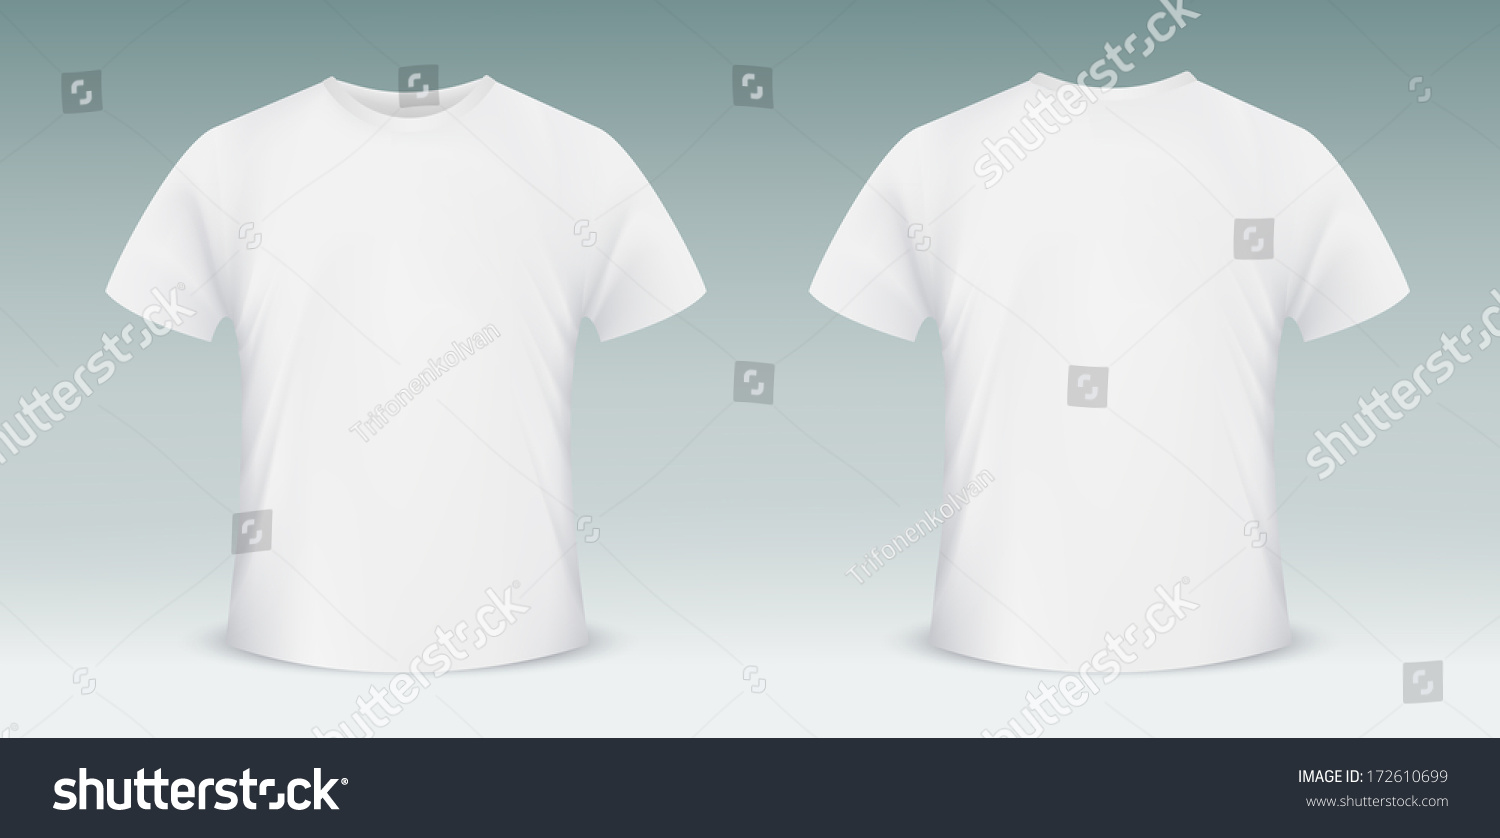 Download Blank Tshirt Template Front Back Side Stock Vector 172610699 - Shutterstock